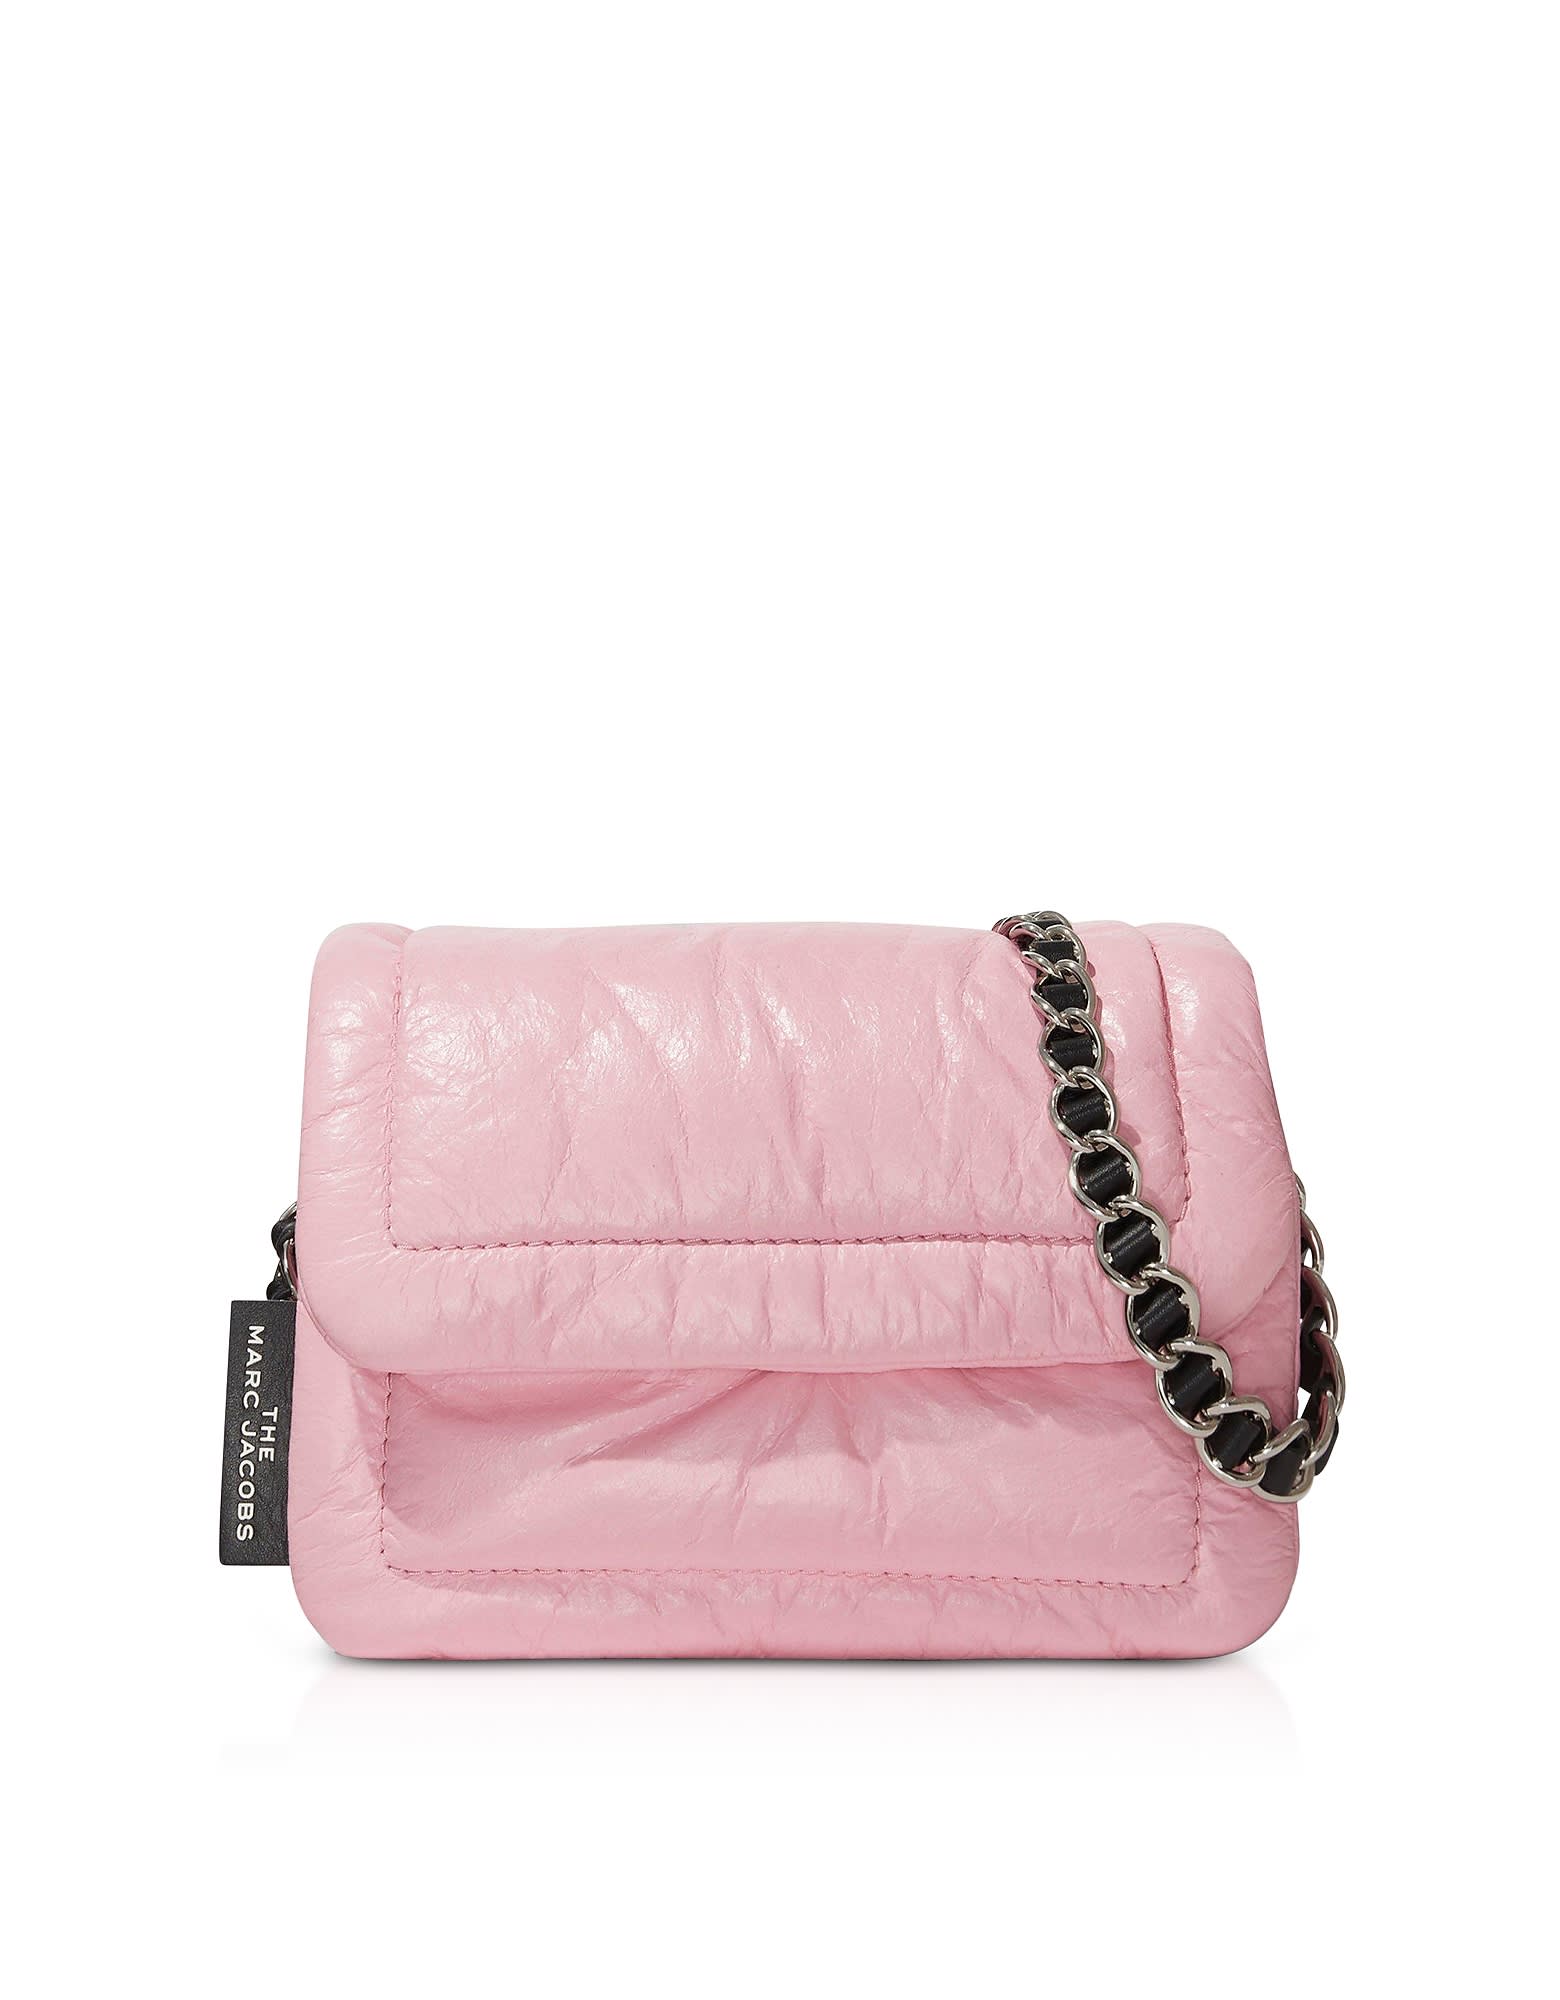 MARC JACOBS THE MINI PILLOW POWDER PINK LEATHER CROSSBODY BAG,11249918